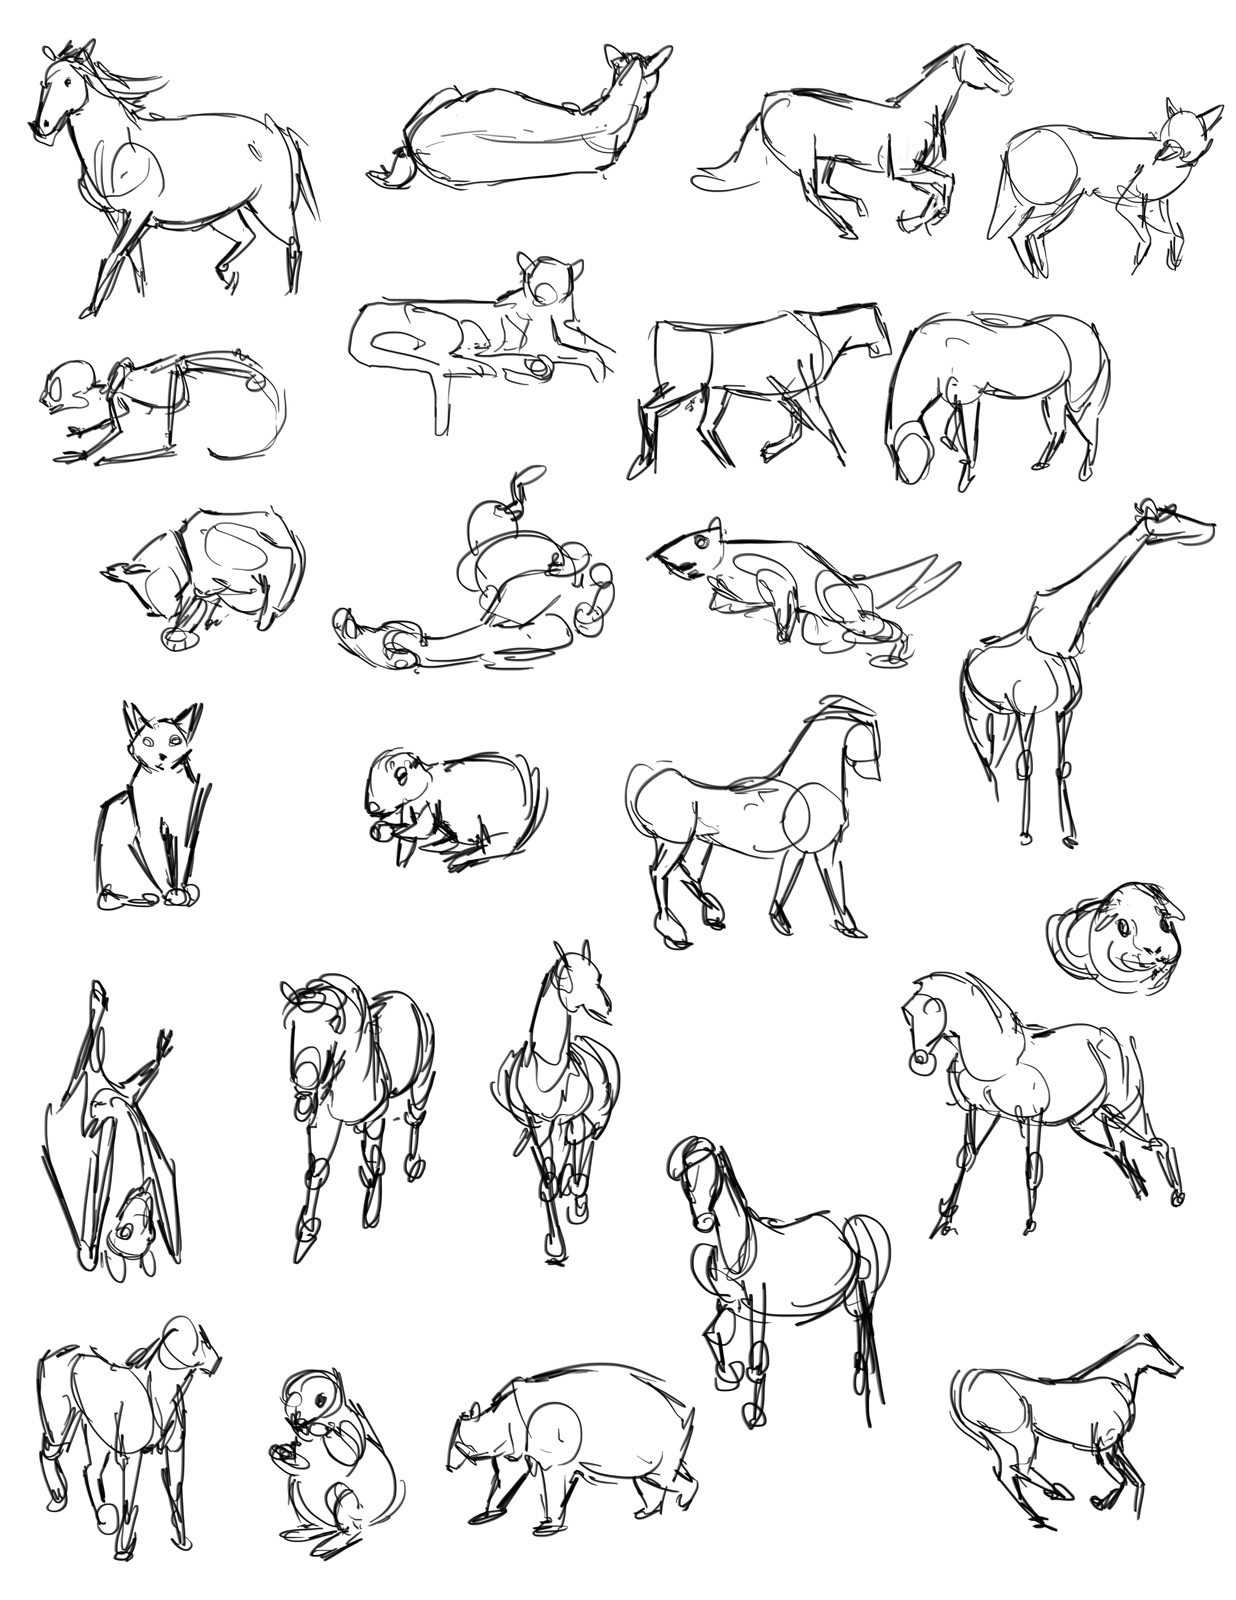 casey hunt: Gesture Drawing Tool | Animals!